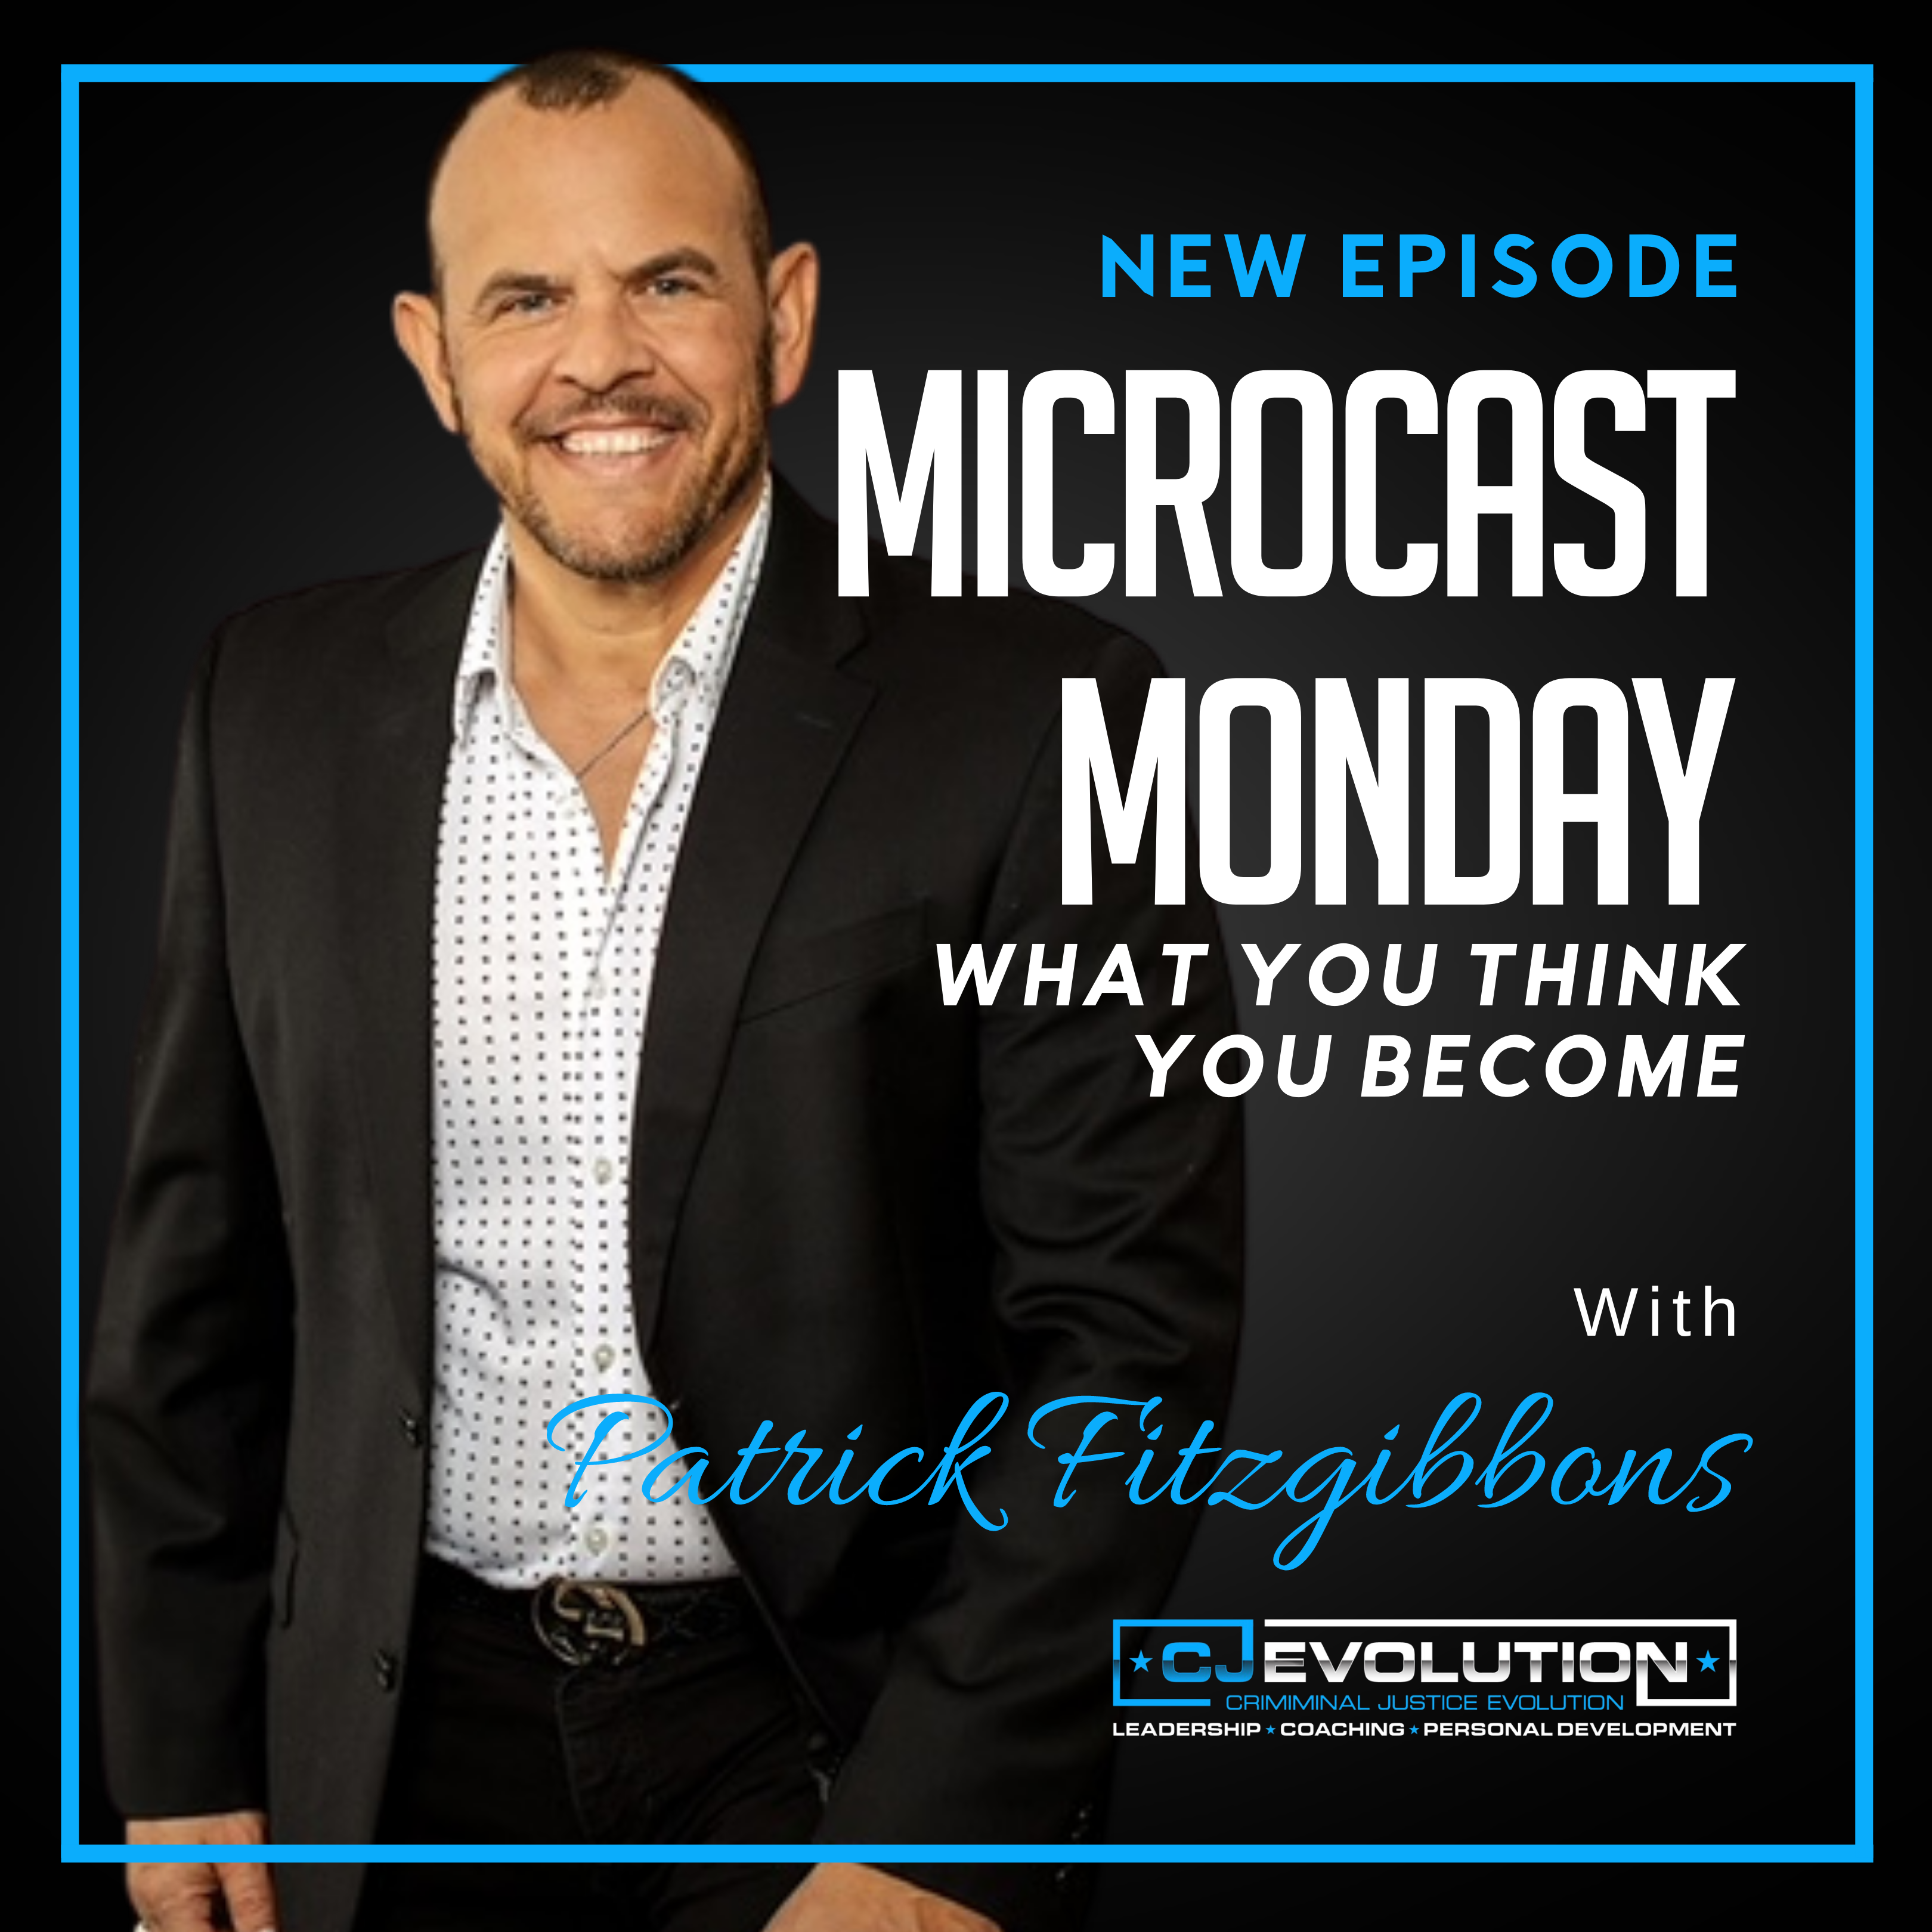 Microcast Monday #135 – What You Think You Become